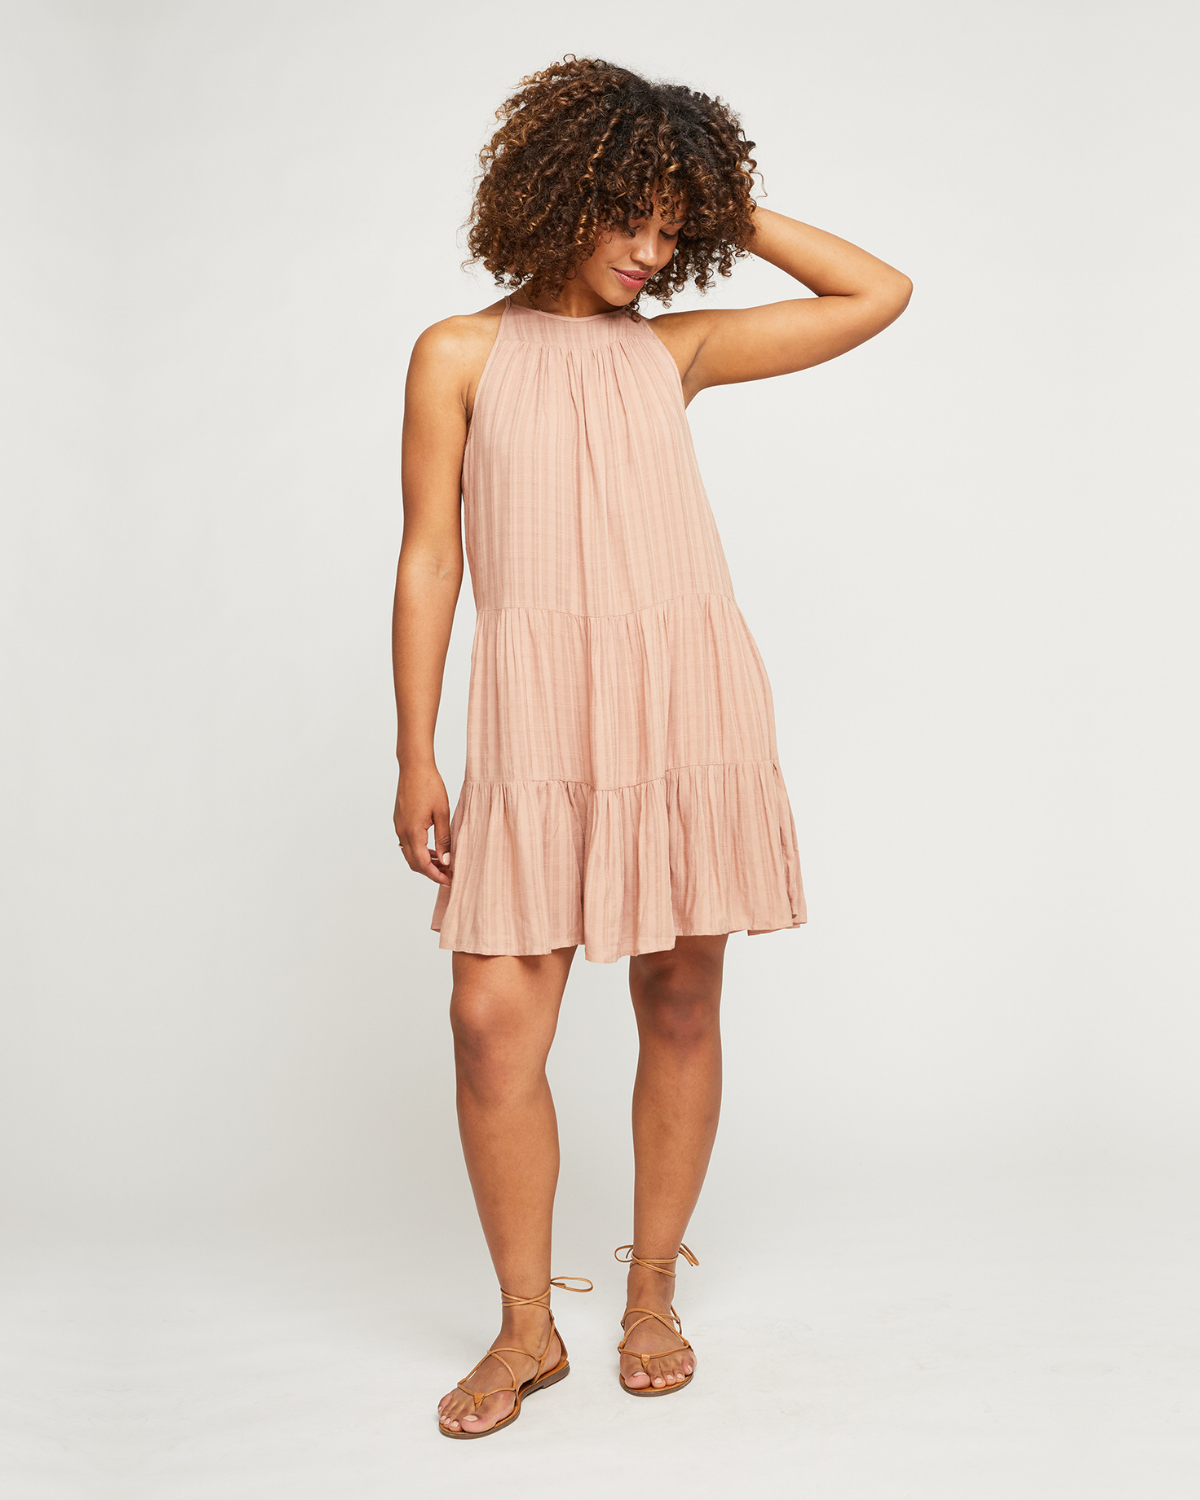 Empire Dress - Ginger | Gentle Fawn